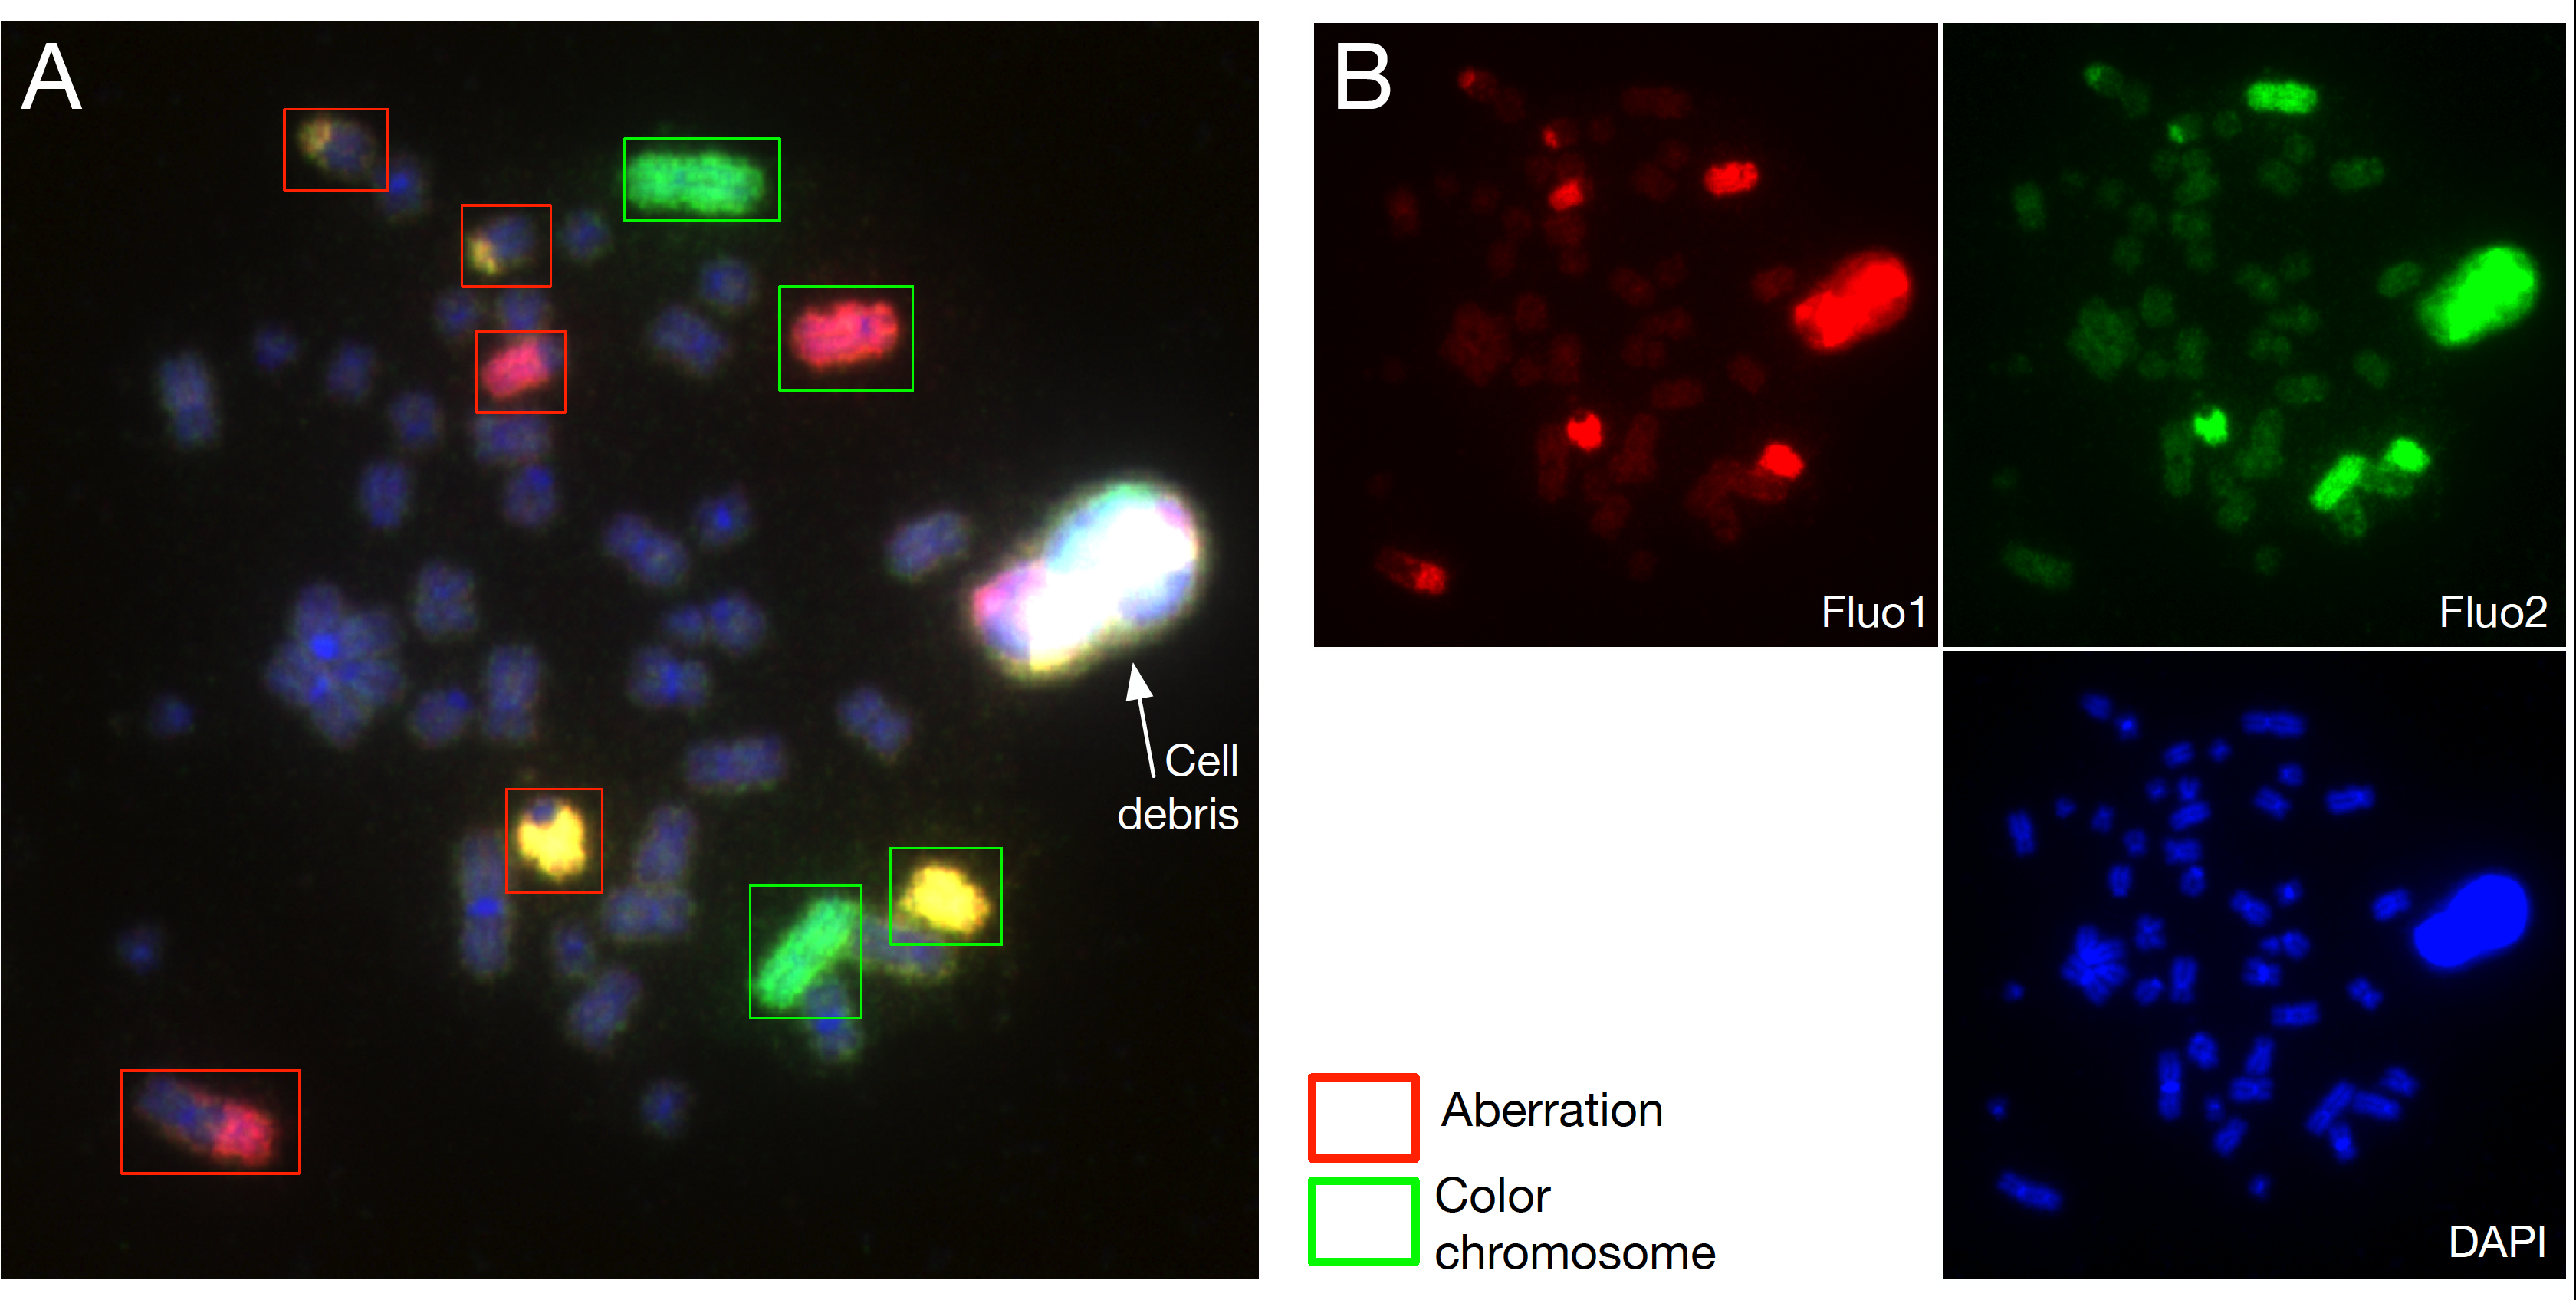 Translocation detection in three-channel FISH images. (A) The green rectangles indicate the location of "normal" chromosomes. The red rectangles correspond to the location of translocated chromosomes. (B) The three separated channels used to localize chromosomes and detect translocations.